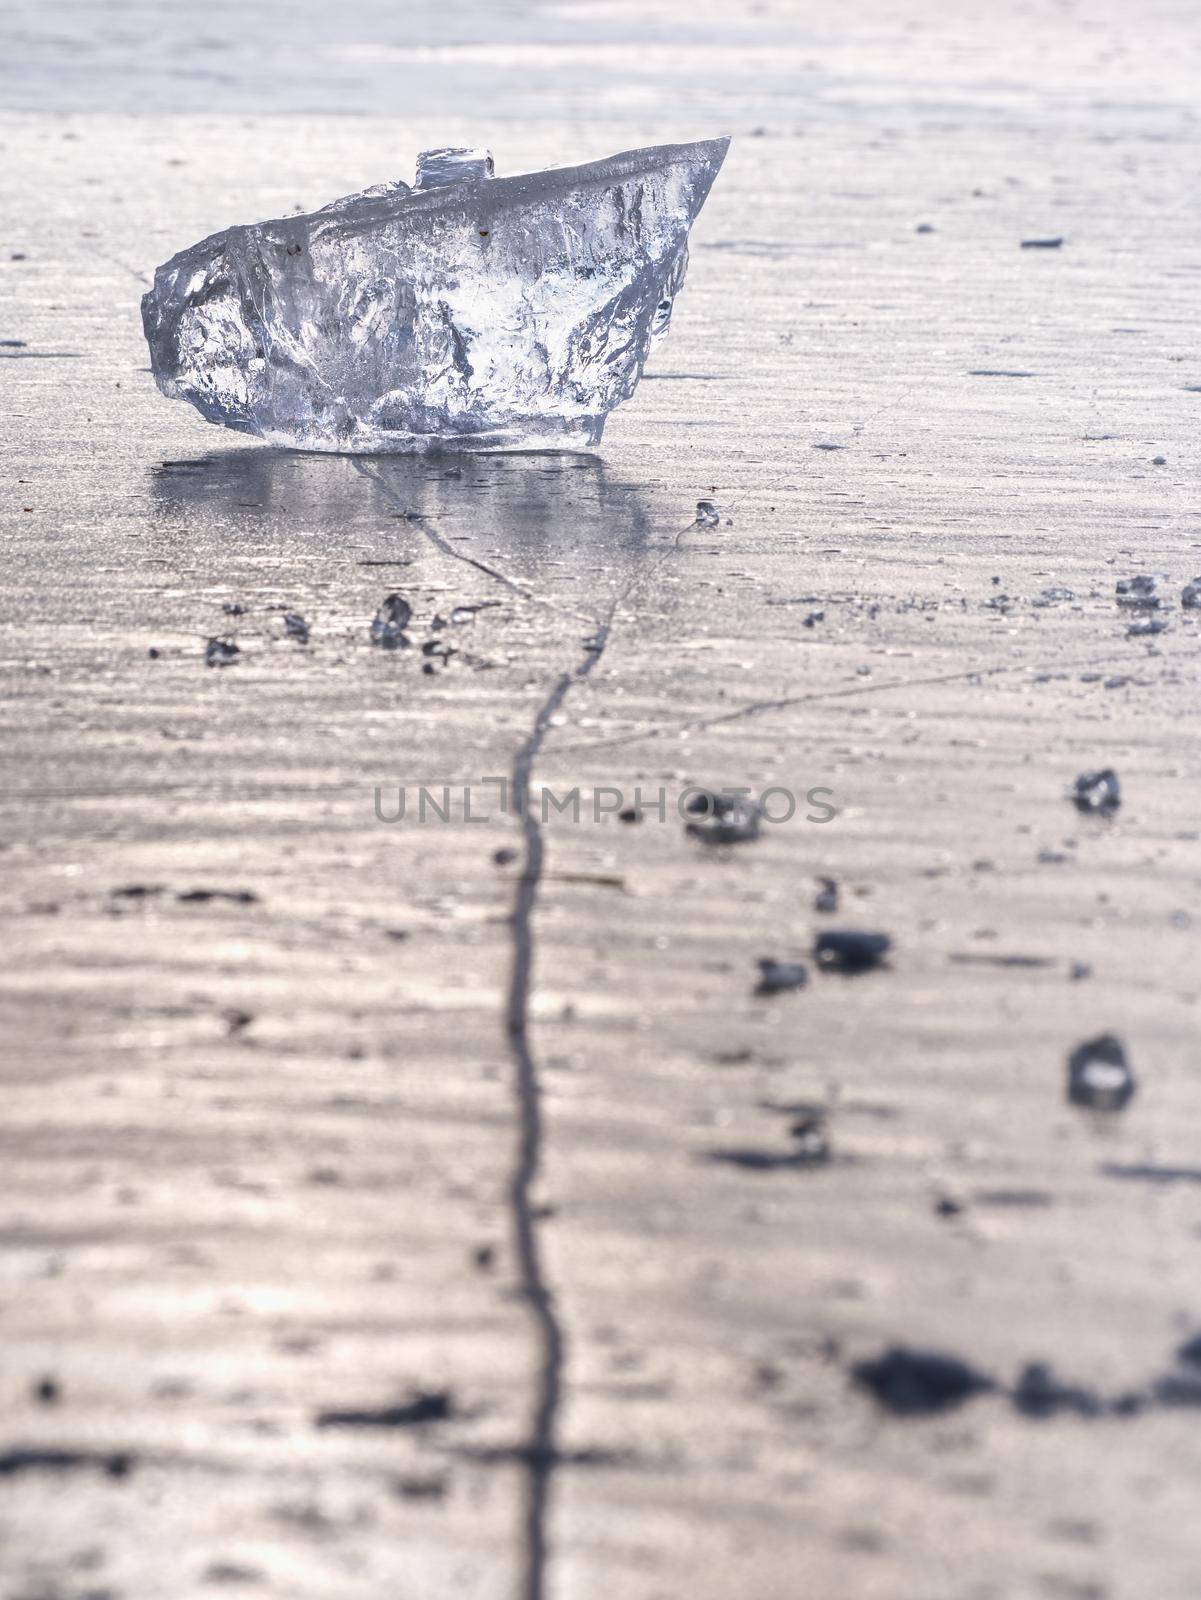 sparkling shards of cracked ice jut out on the frozen lake. The light effect occurs by rdonar2